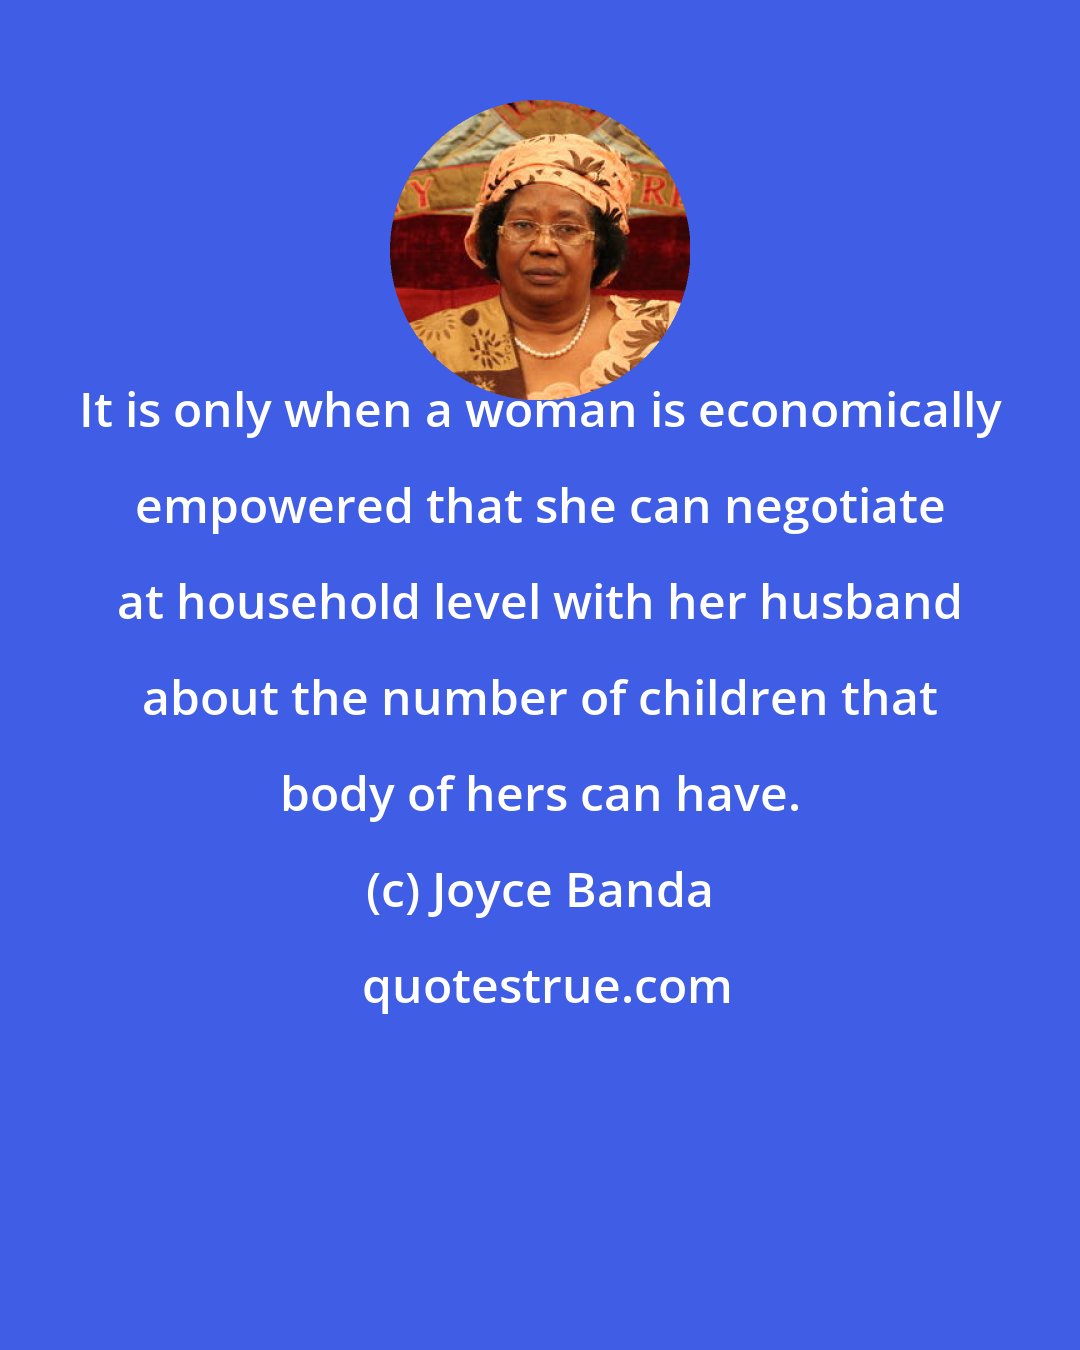 Joyce Banda: It is only when a woman is economically empowered that she can negotiate at household level with her husband about the number of children that body of hers can have.